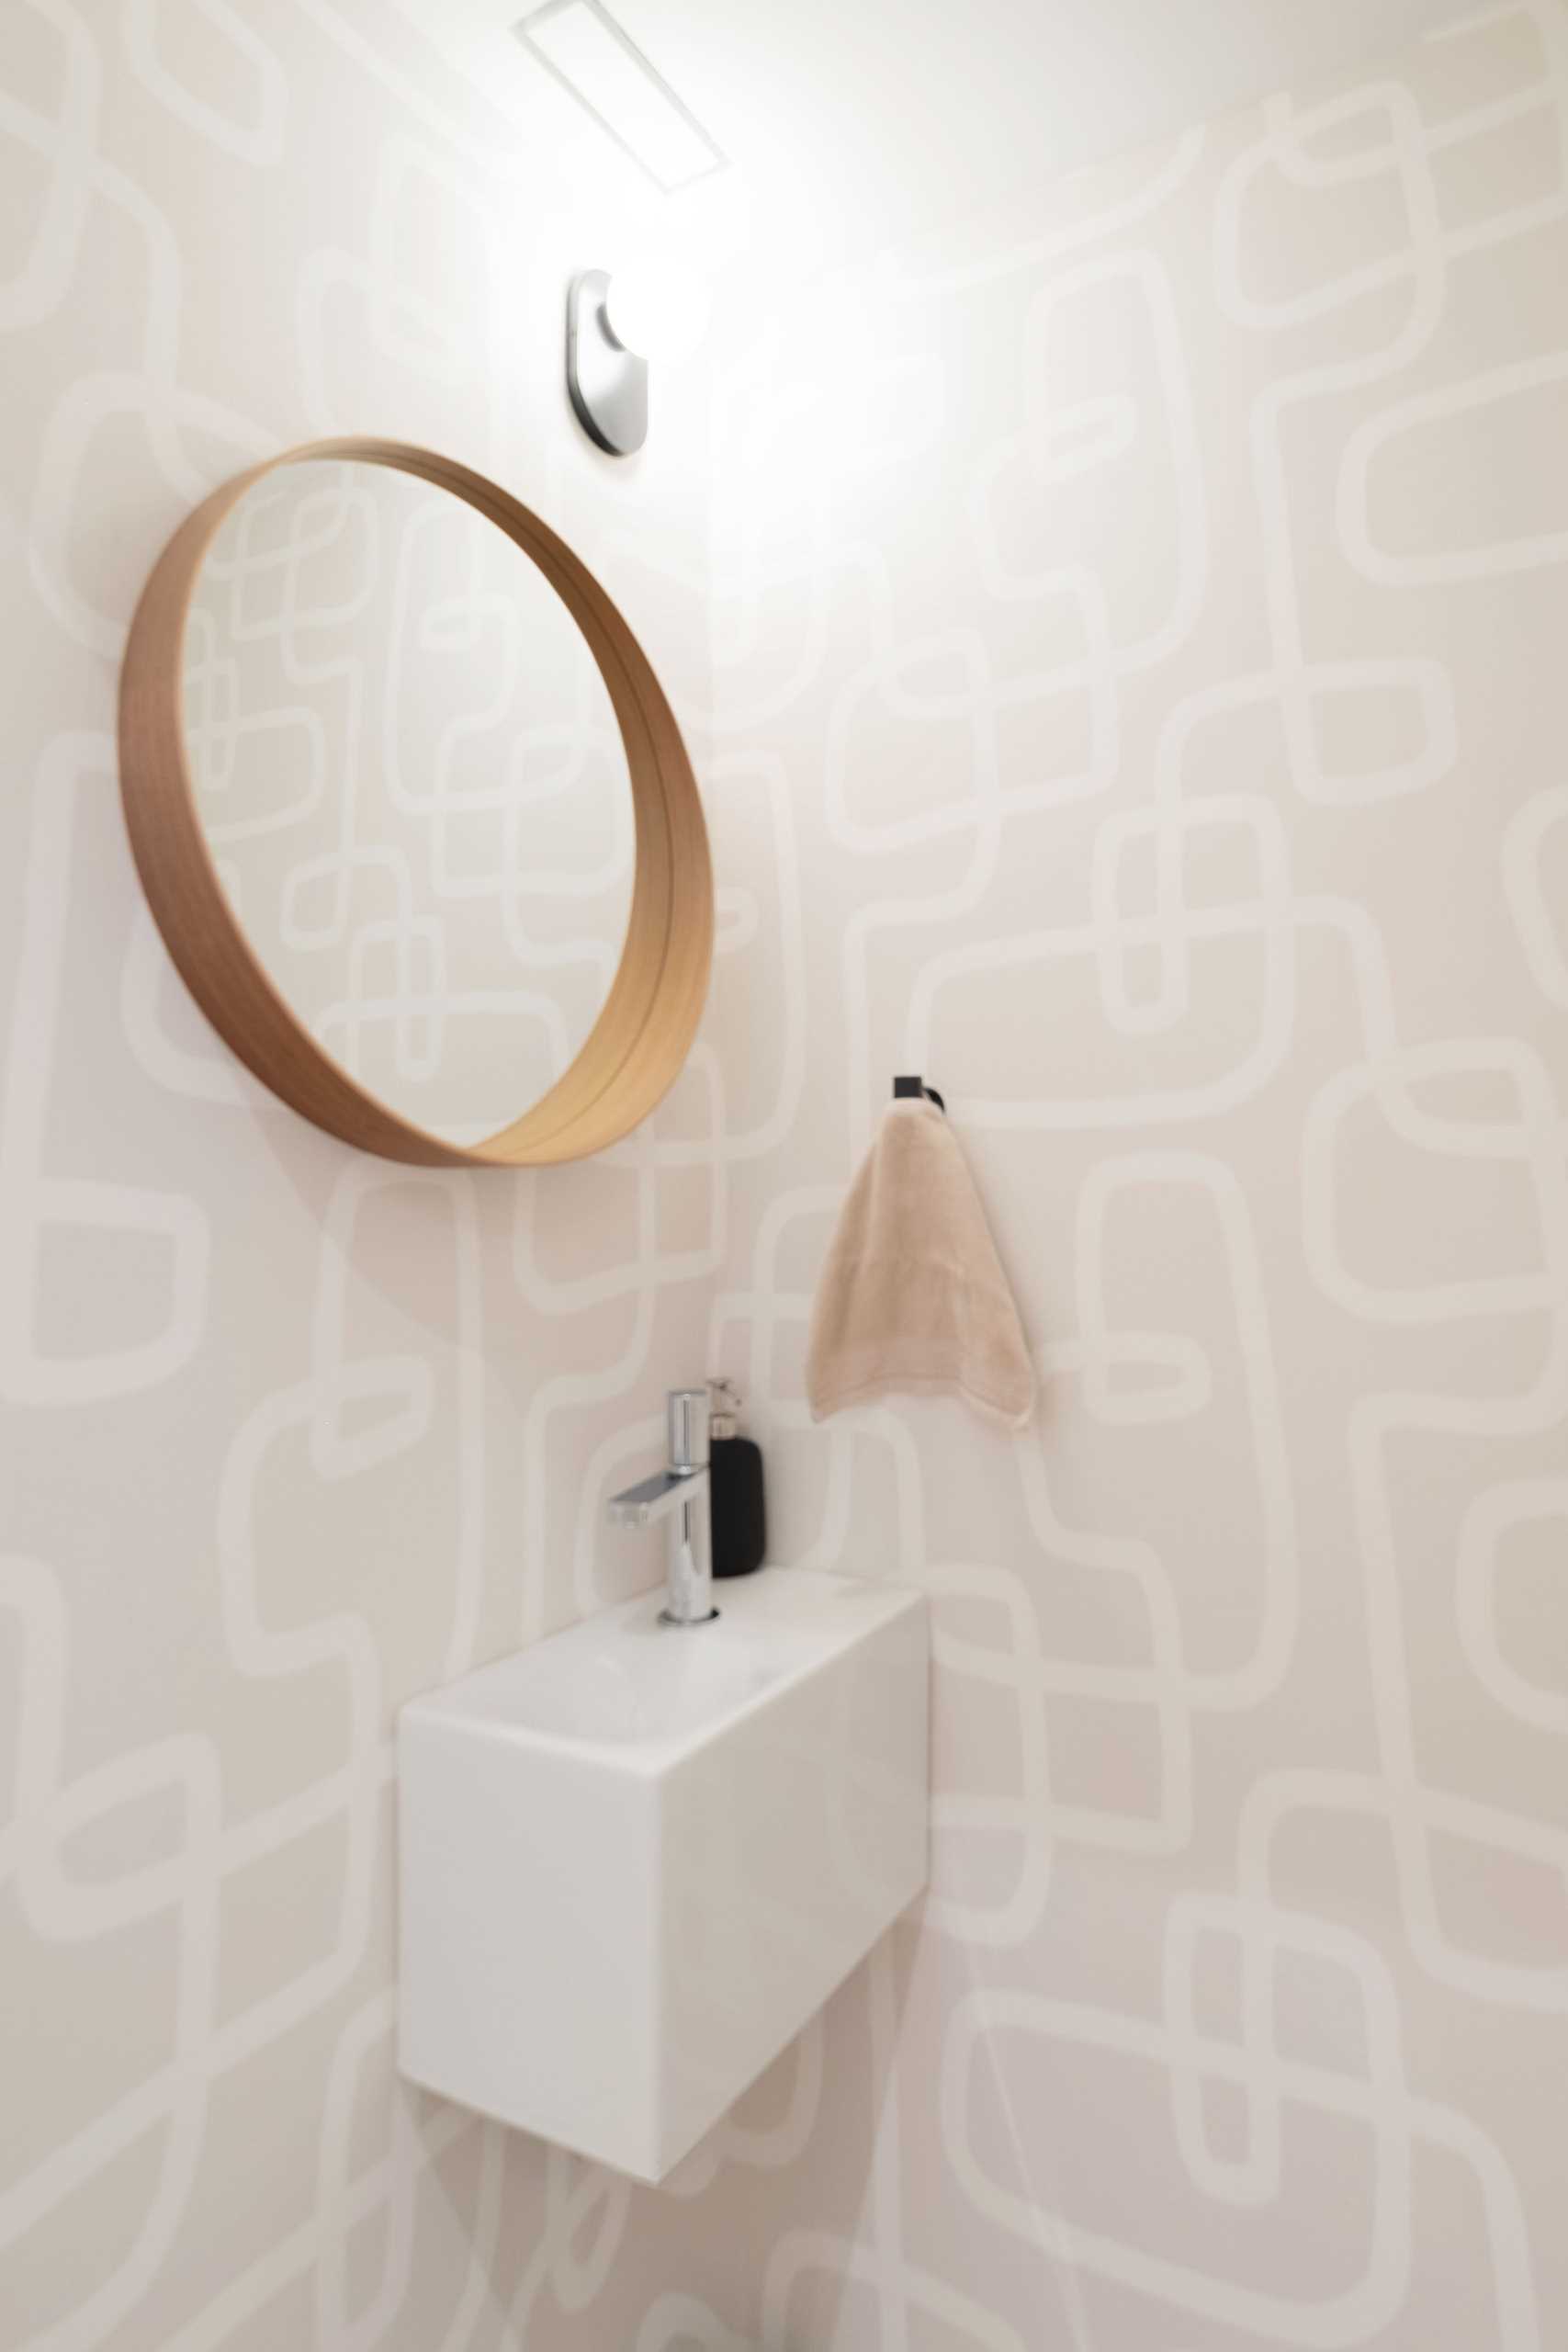 A neutral bathroom with a patterned wallpaper.